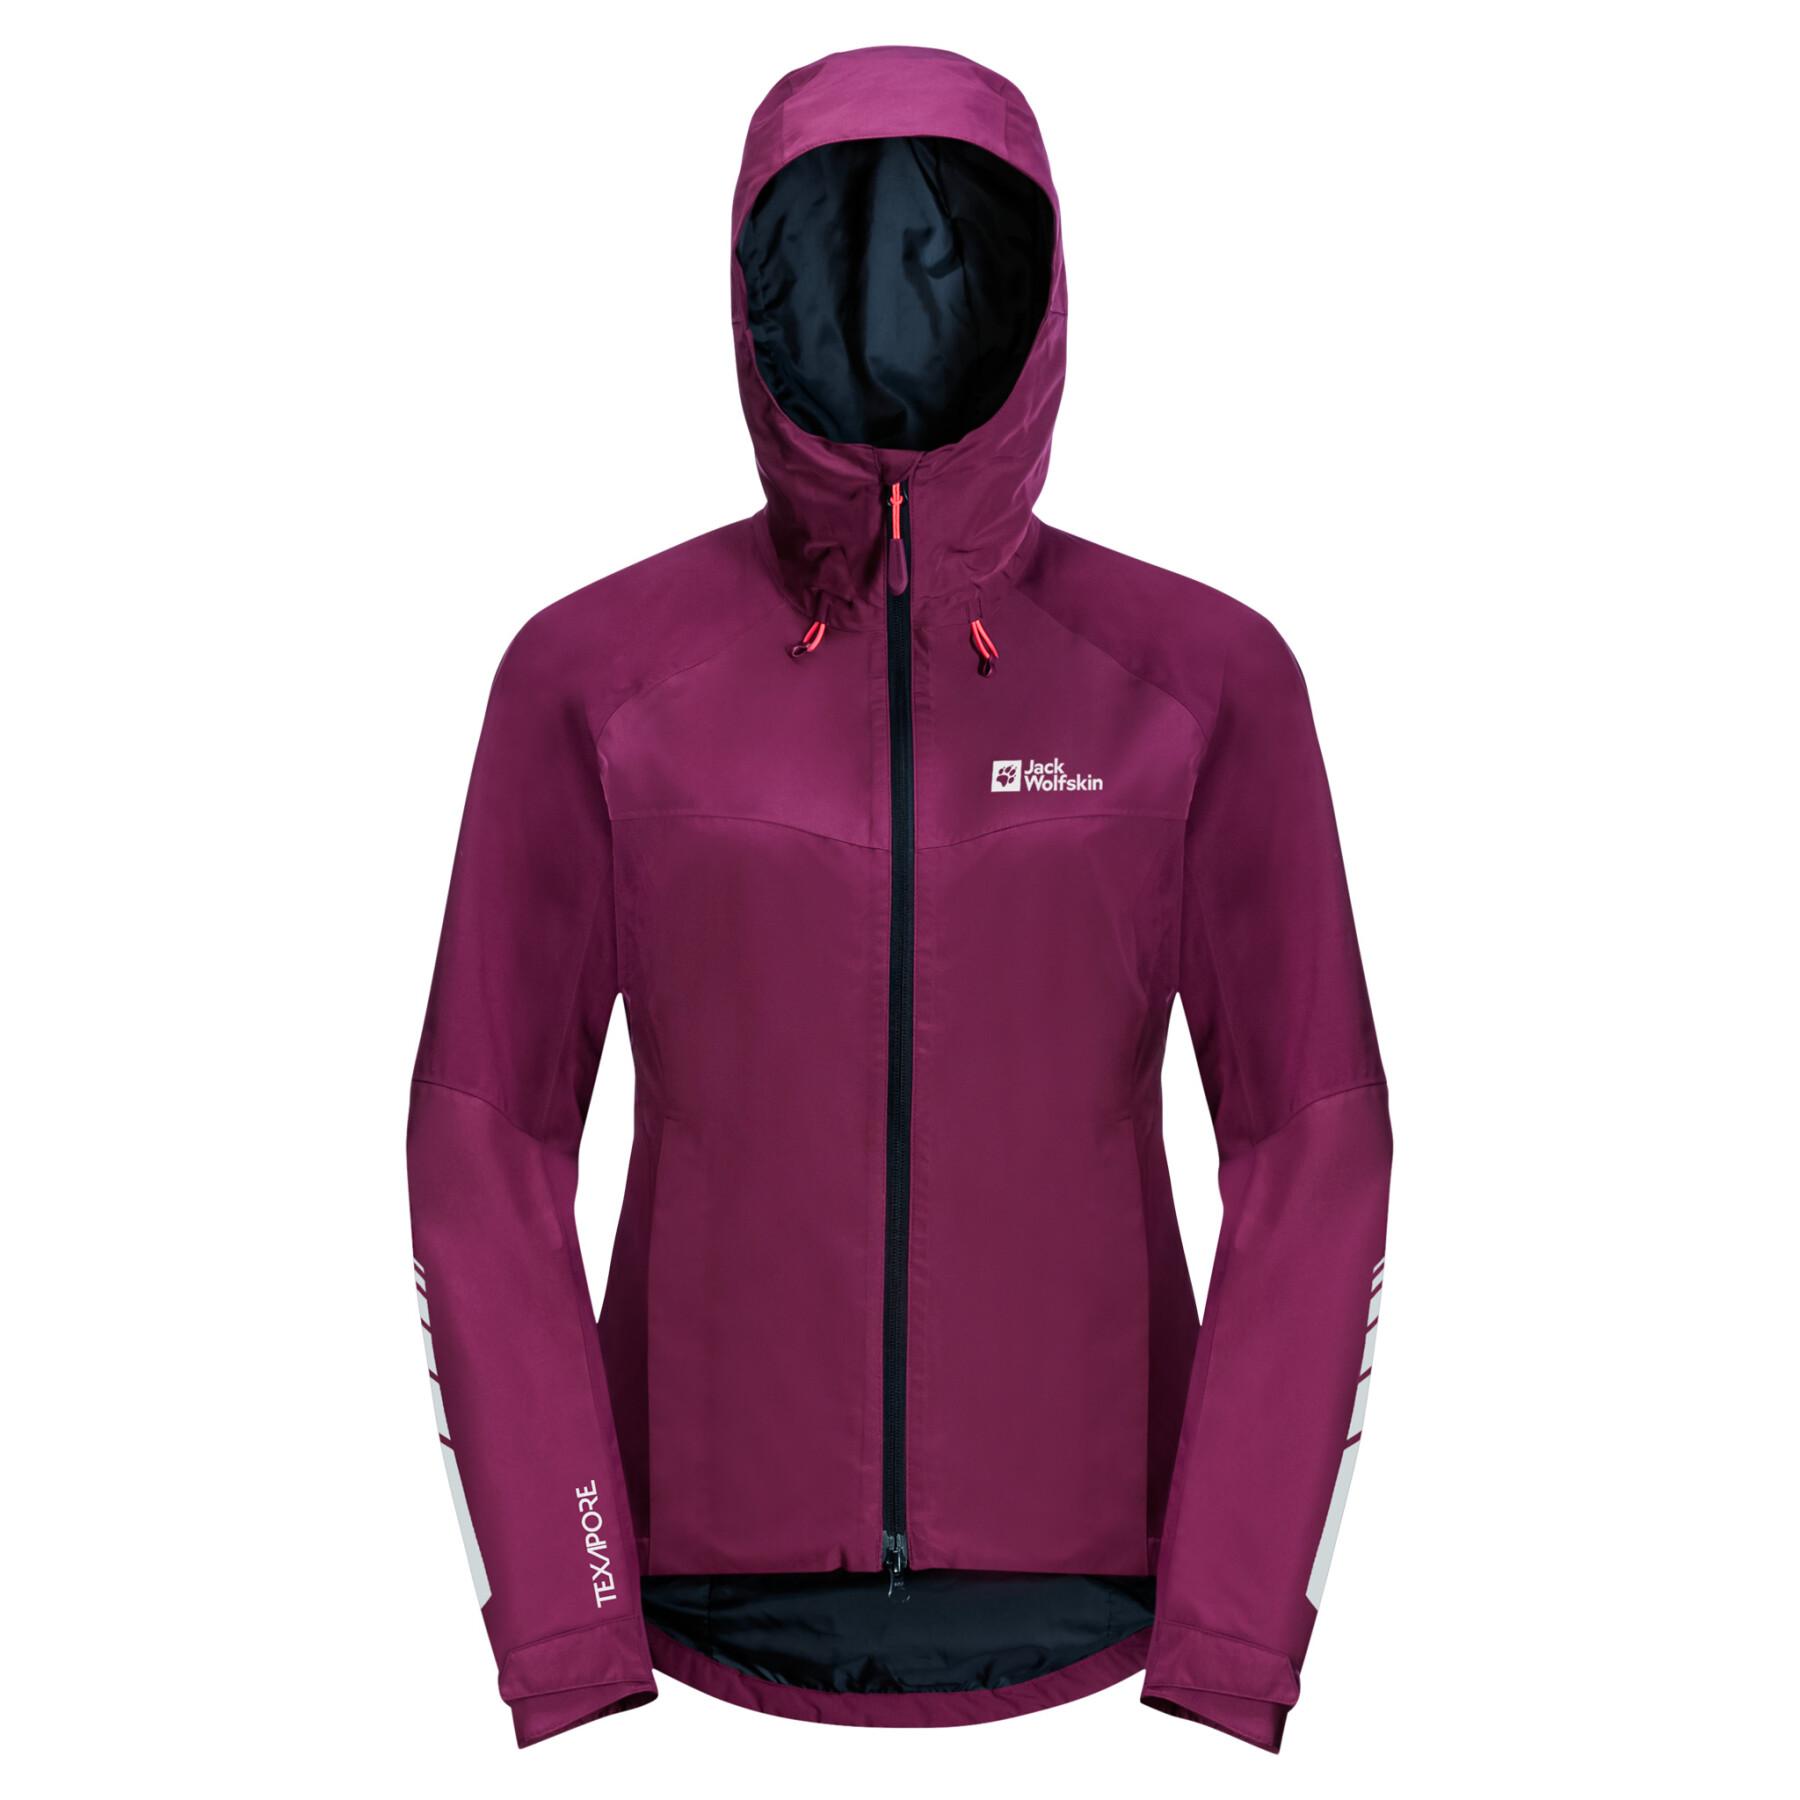 Chaqueta impermeable para mujer Jack Wolfskin Morobbia 2L (GT)